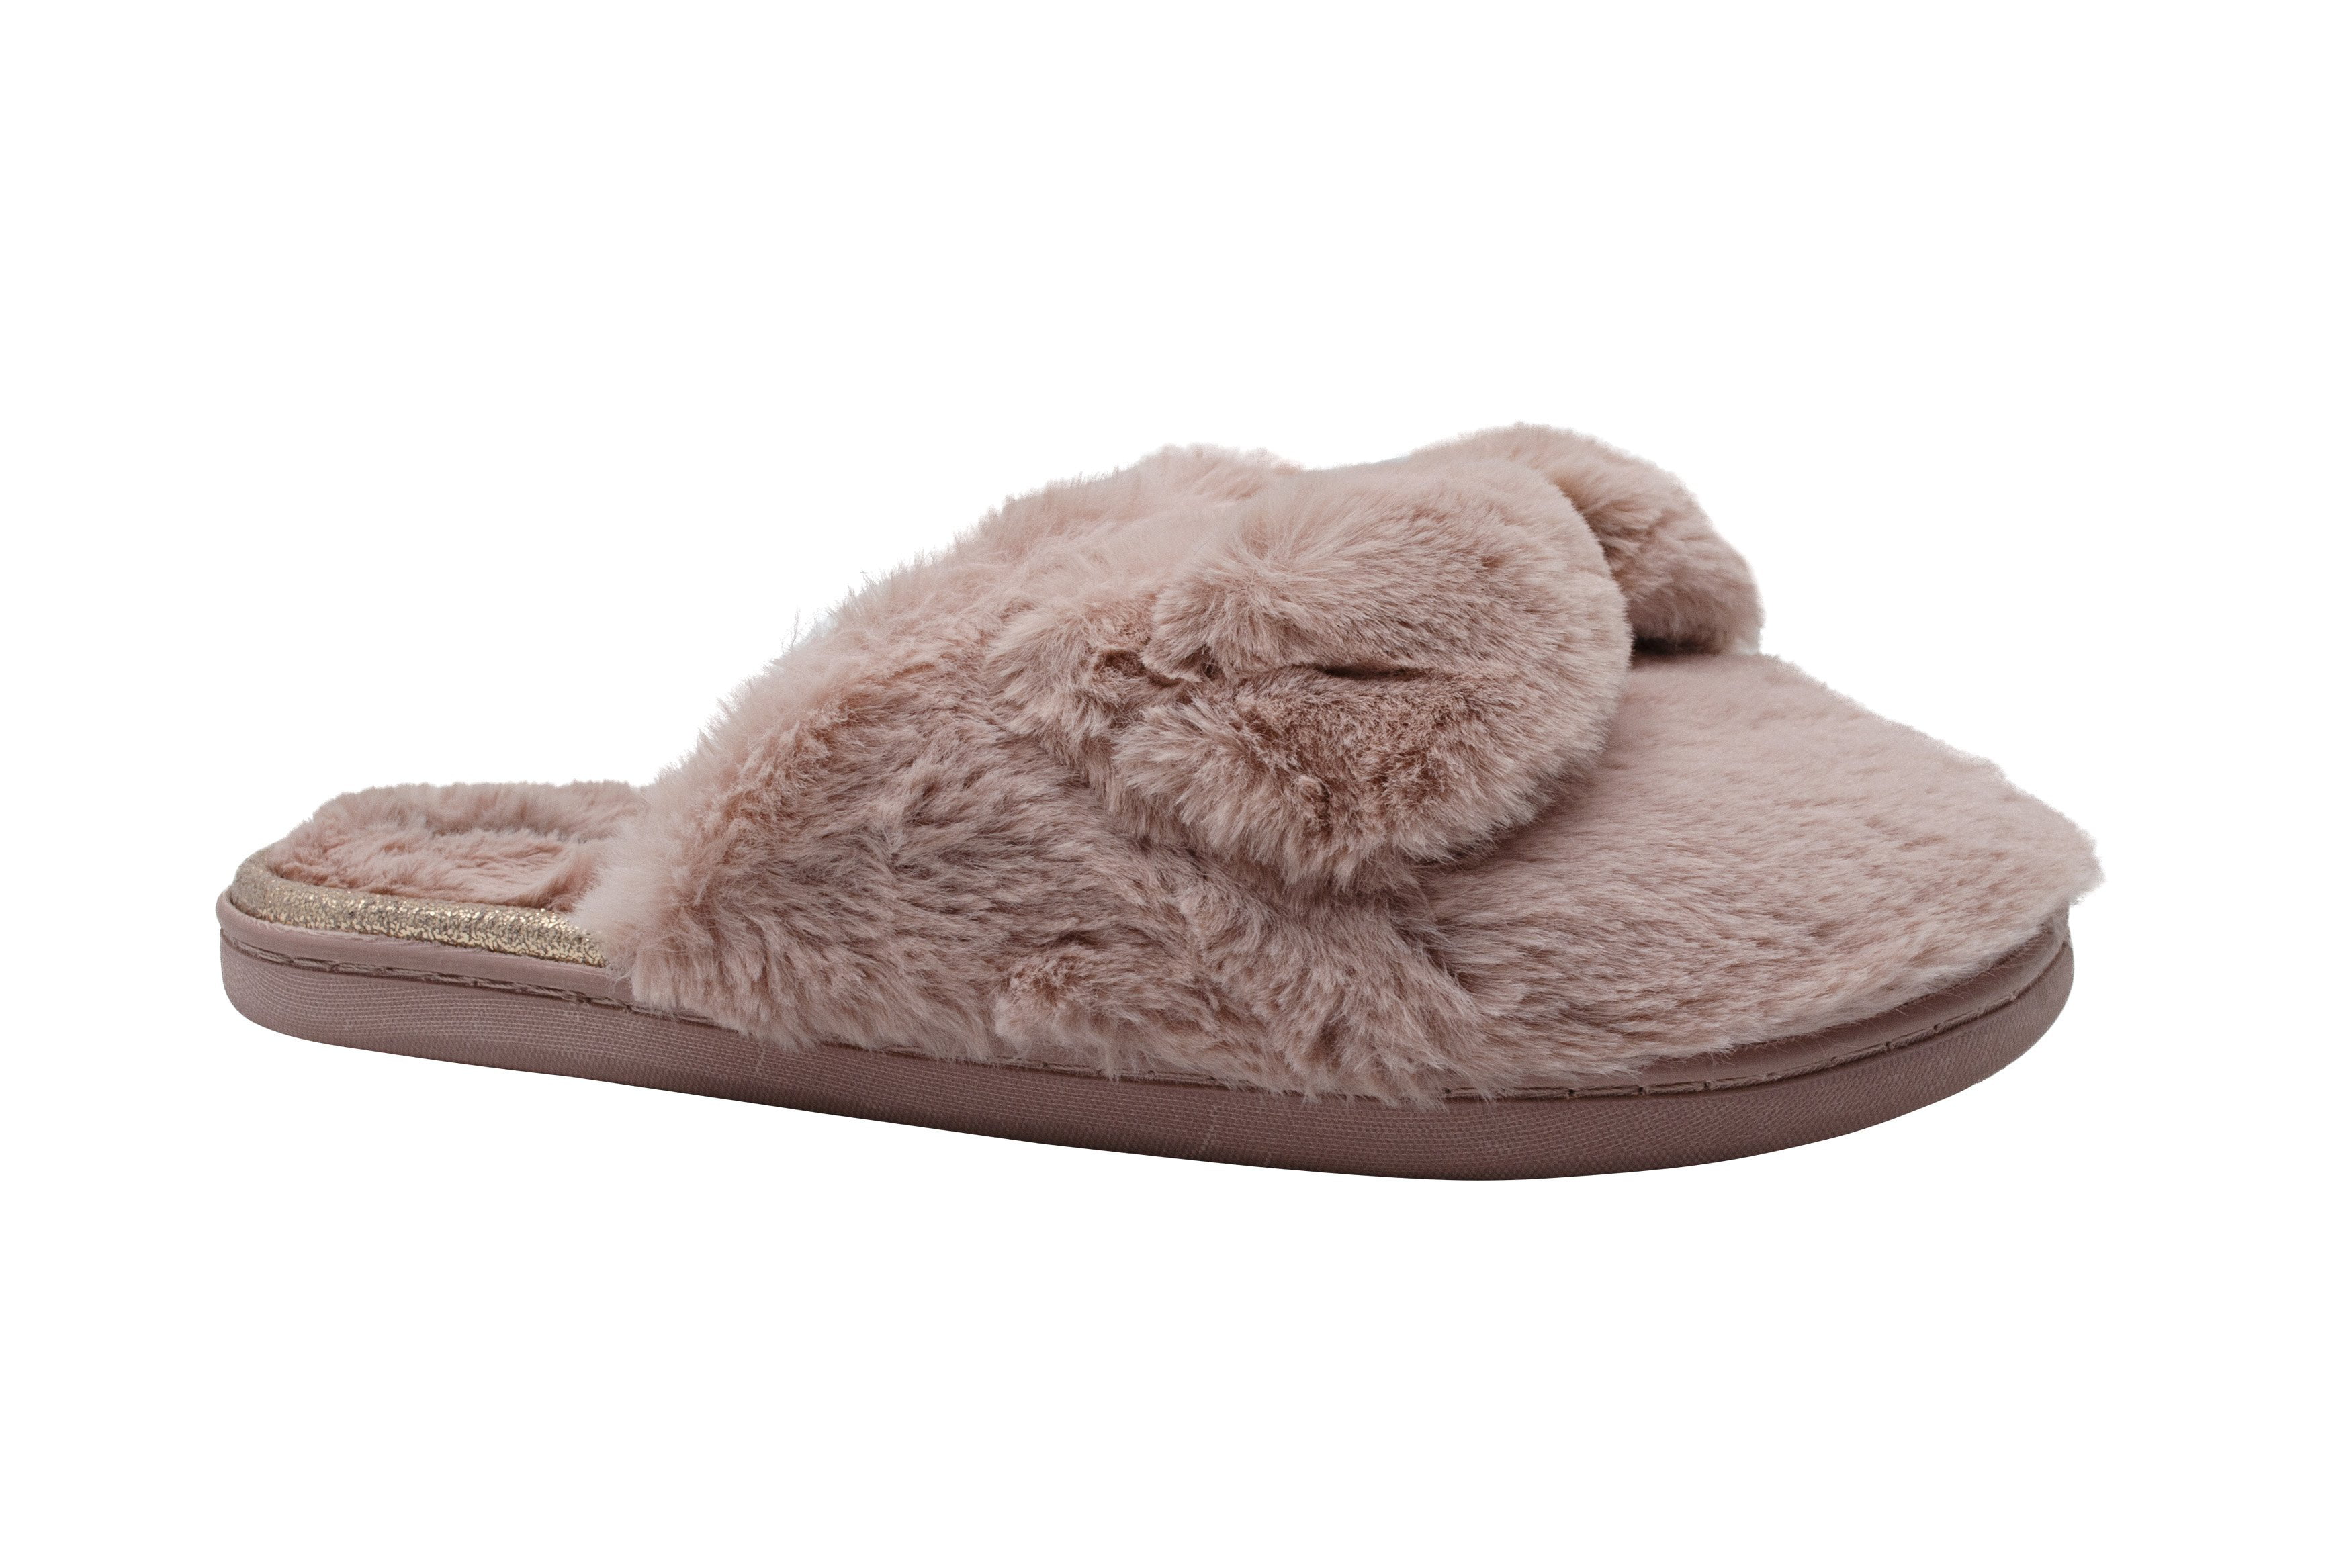 comfy house slippers